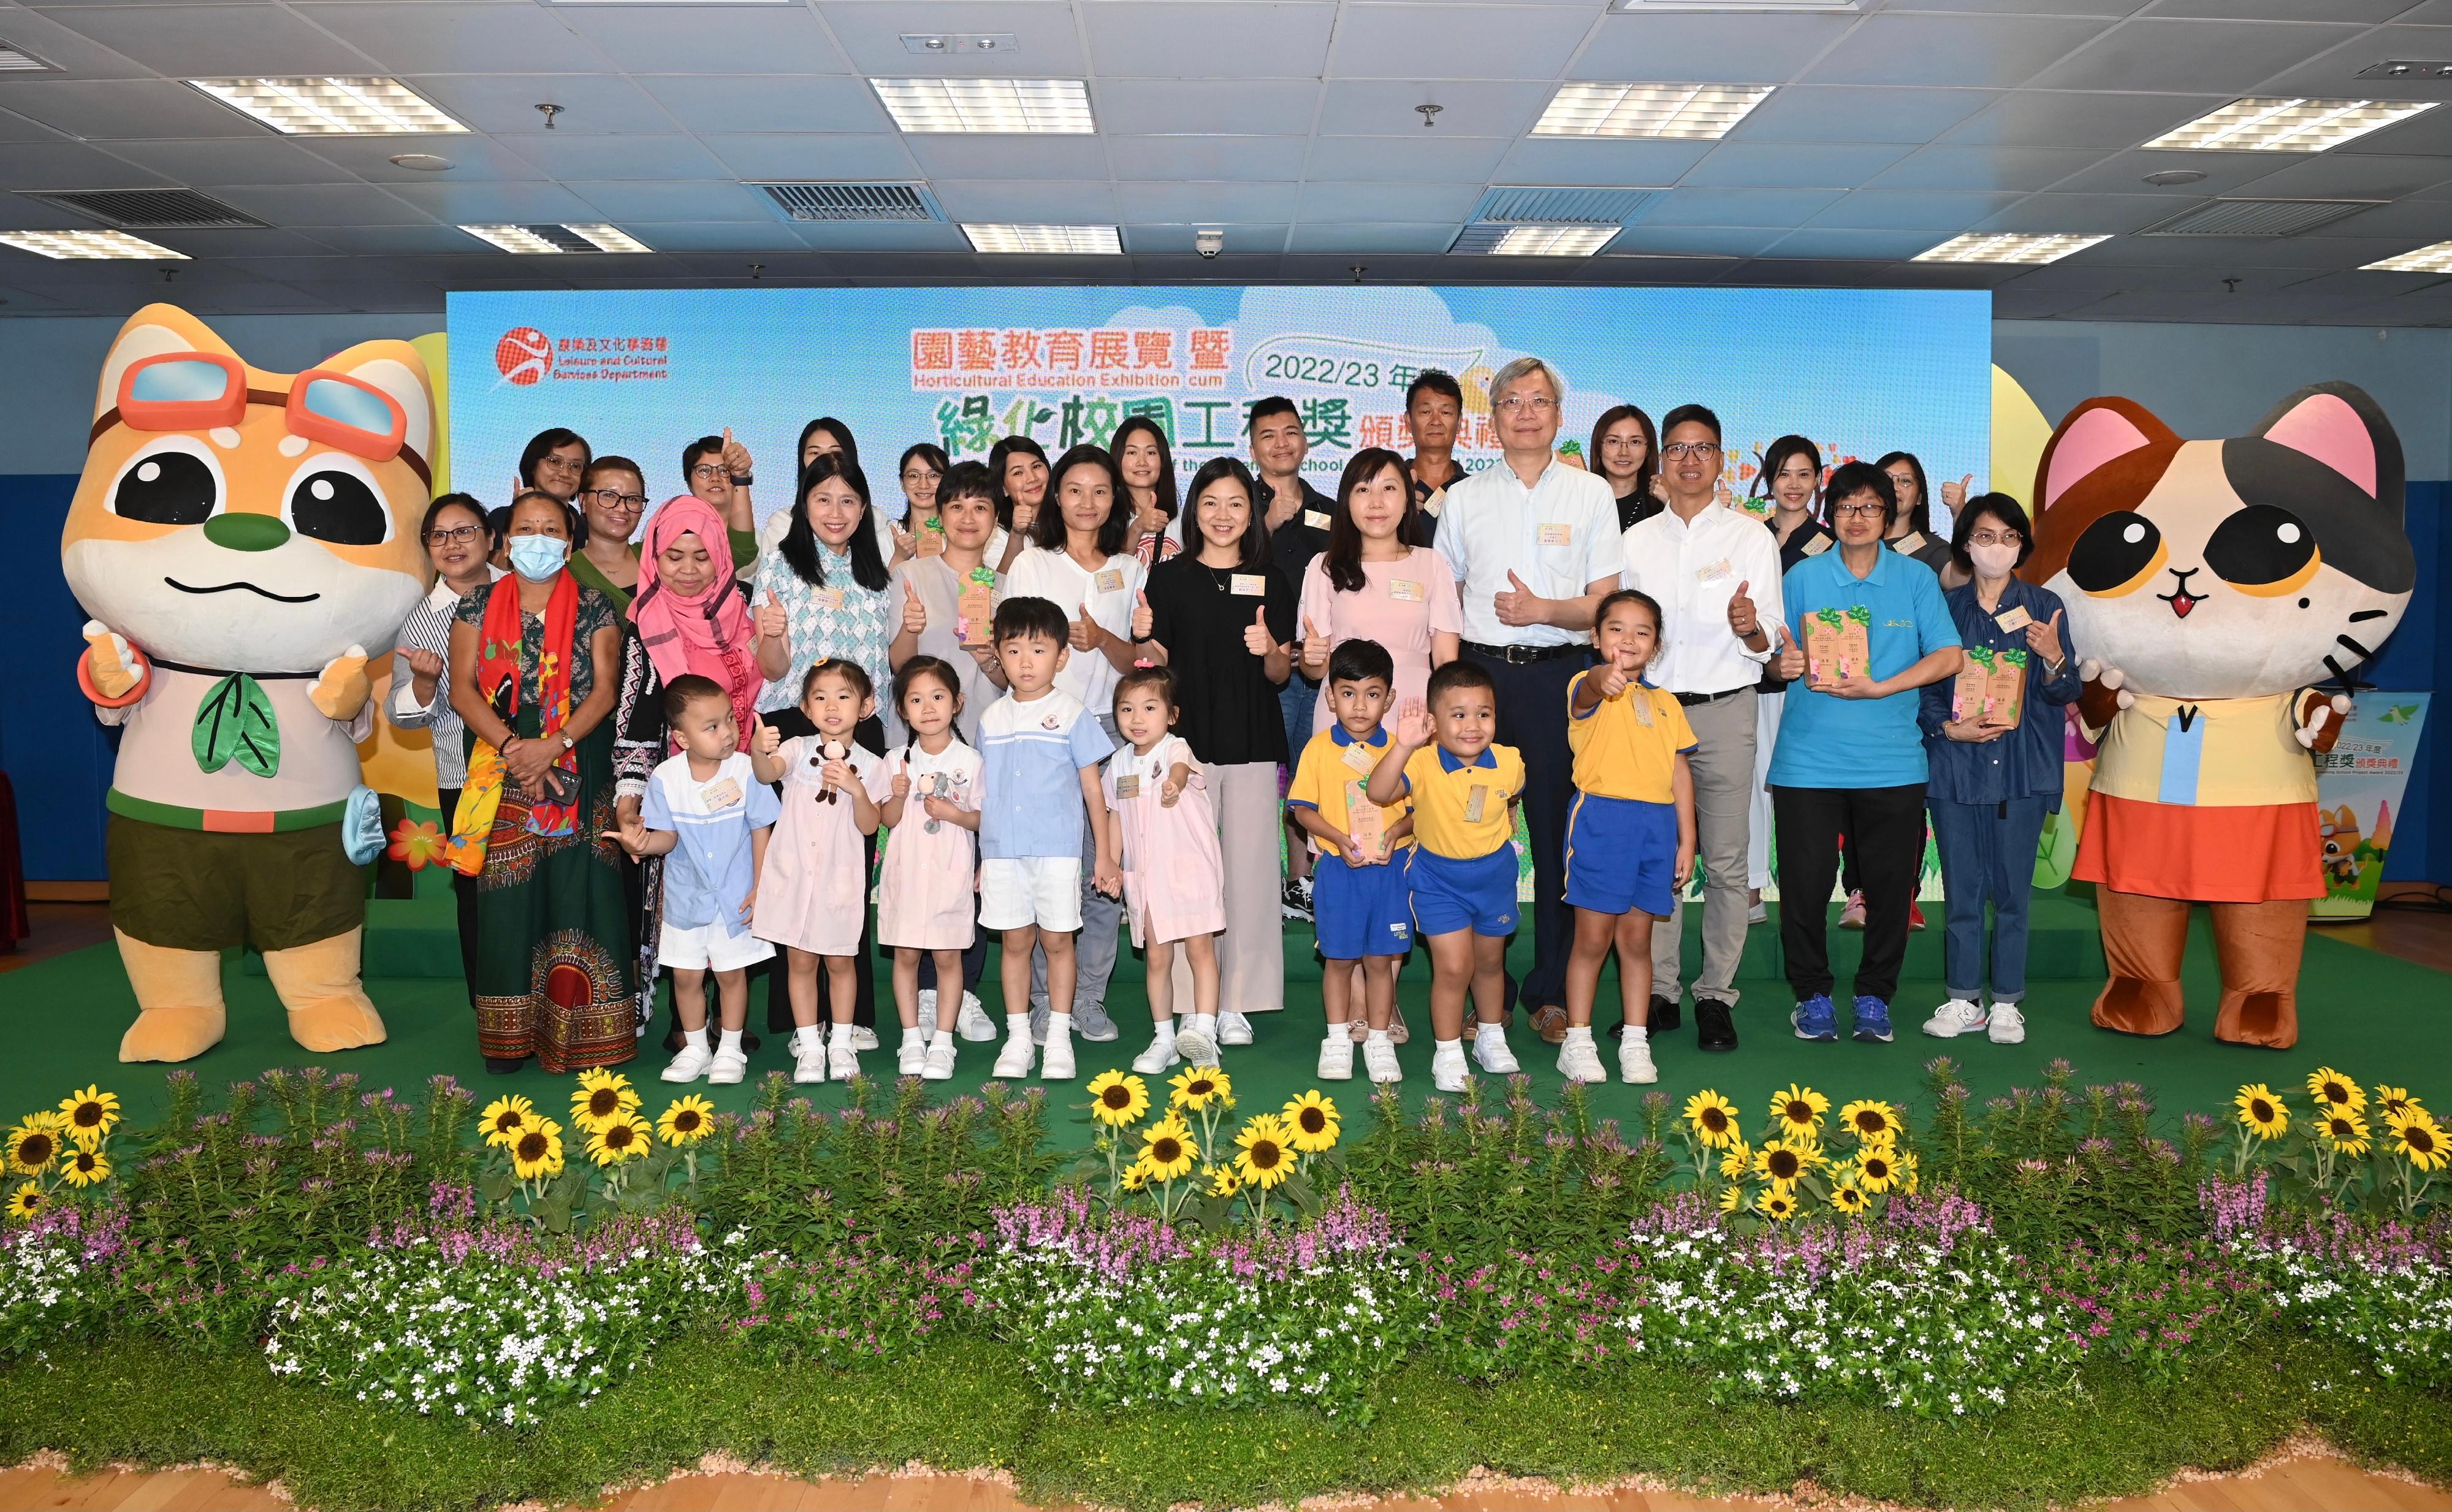 
The Leisure and Cultural Services Department (LCSD) held the Greening School Project Award prize presentation ceremony at the Kowloon Park Sports Centre today (July 22) to present awards to 37 schools for their meritorious green school projects and contributions to environmental greening. Pictured are the officiating guests together with the winners of Kindergarten Section.
